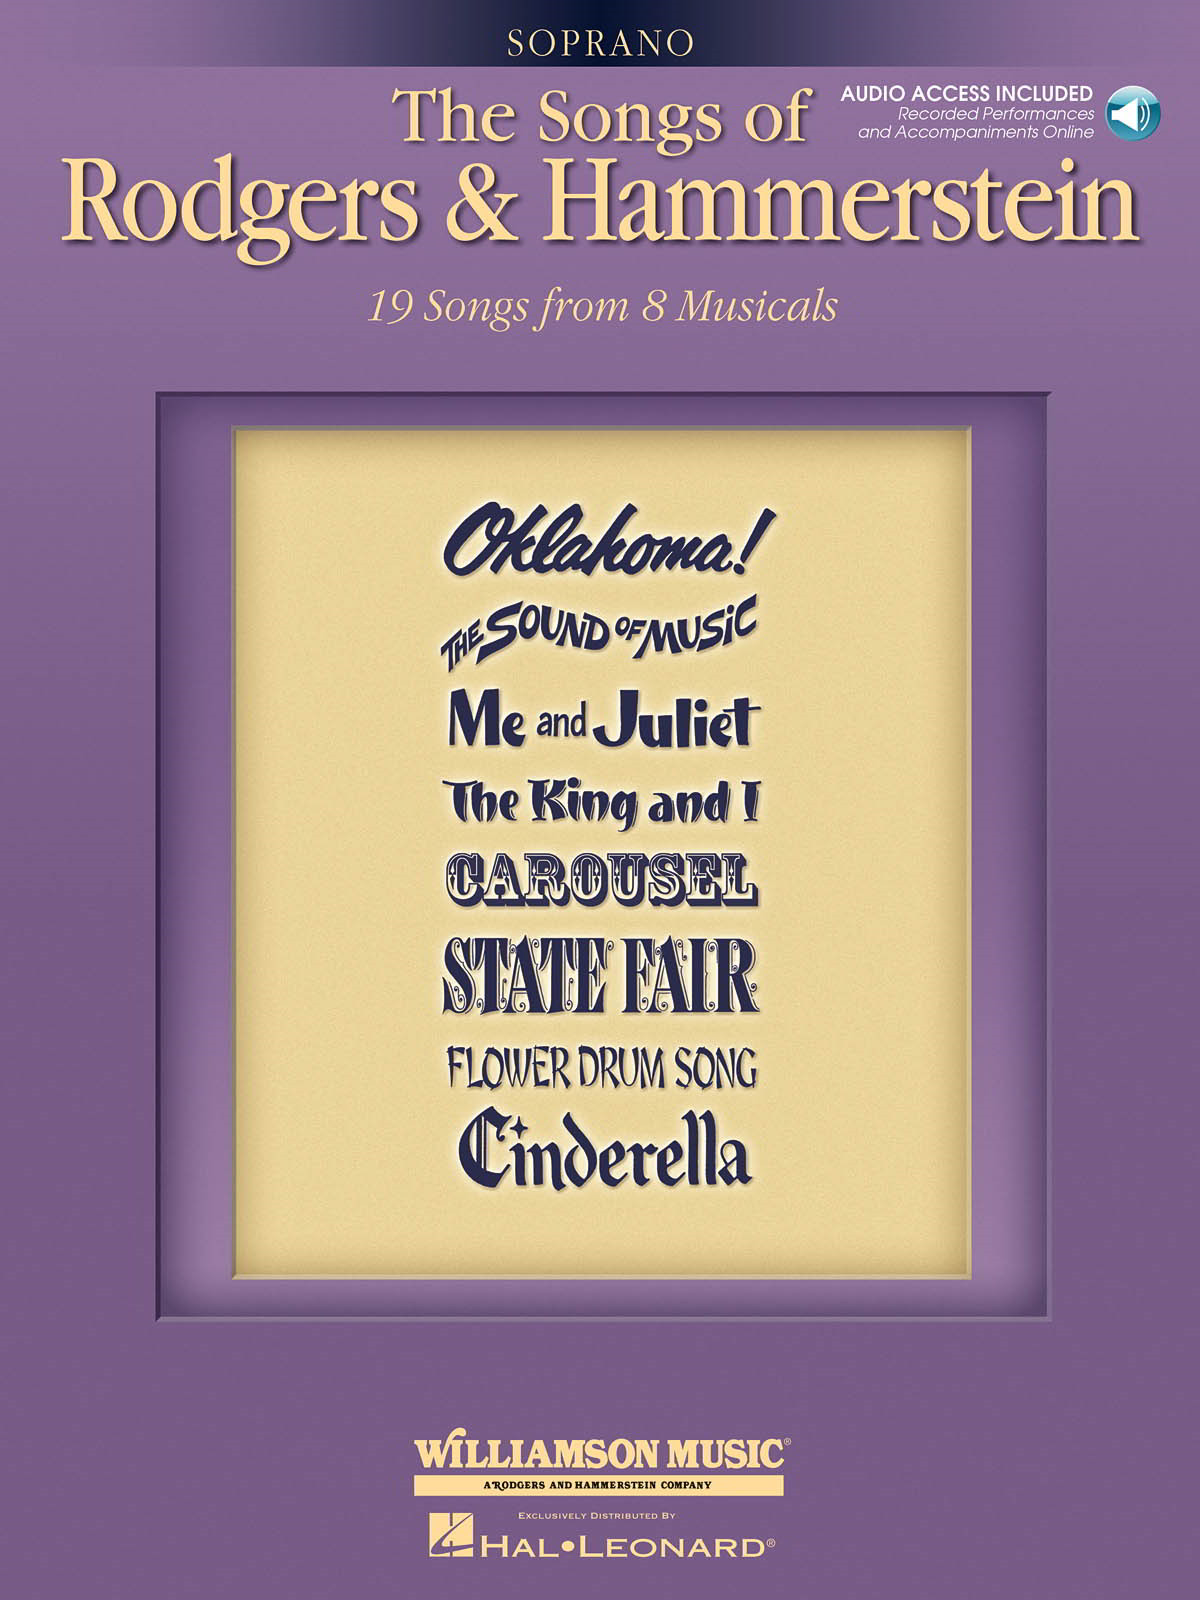 The Songs Of Rodgers And Hammerstein - Soprano published by Hal Leonard (Book/Online Audio)